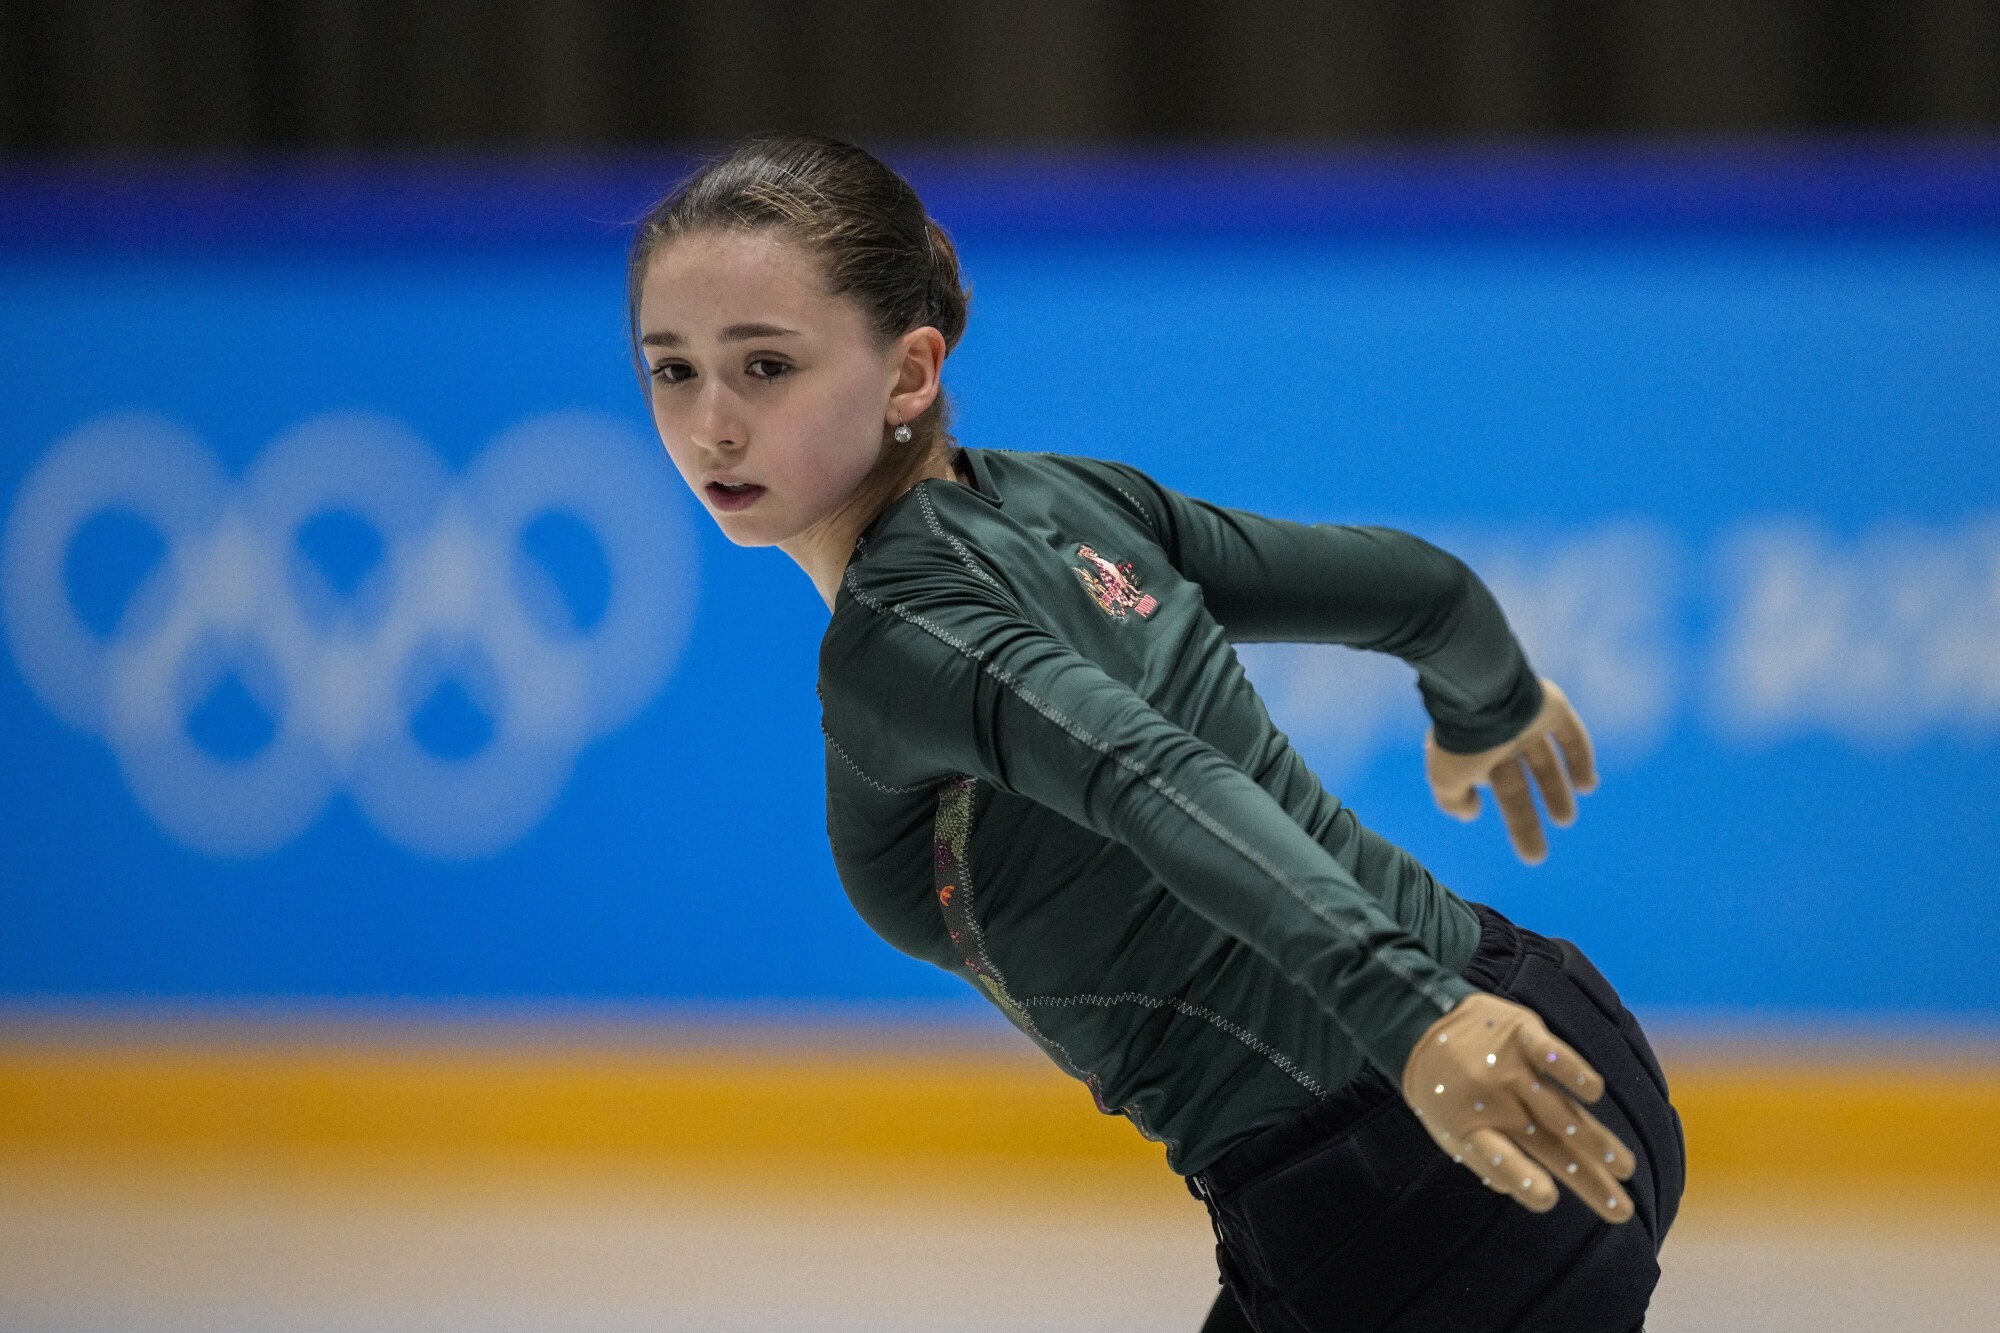 Kamila Valieva of the Russian Olympic Committee trains in Beijing on Saturday.